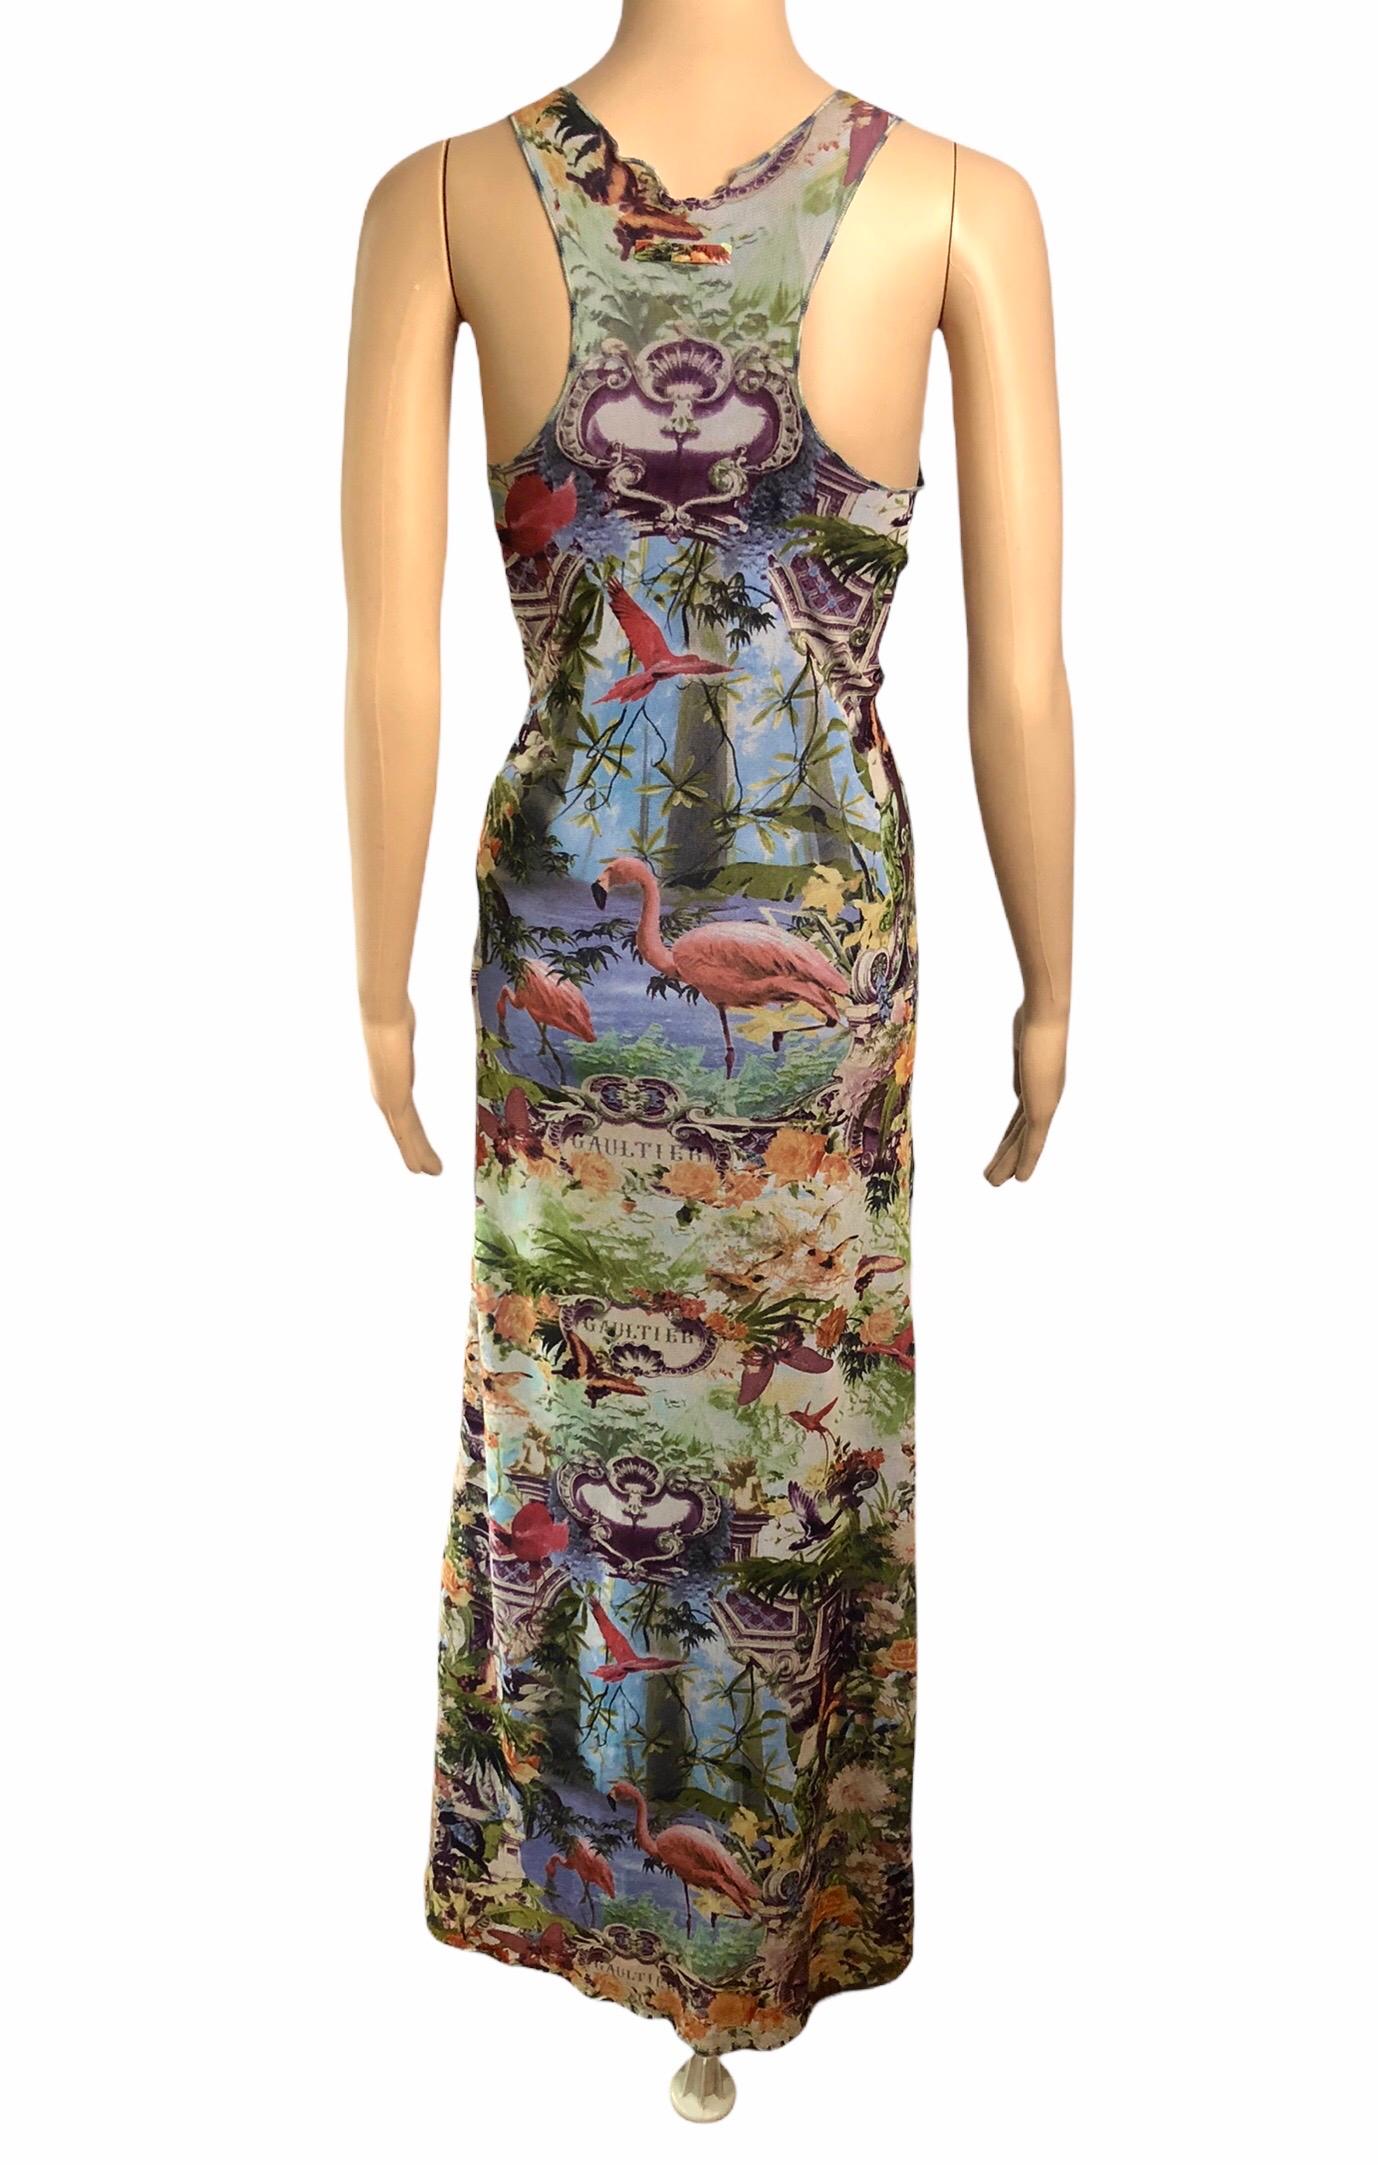 Jean Paul Gaultier Soleil S/S 1999 Tropical Flamingo Semi-Sheer Mesh Maxi Dress In Good Condition For Sale In Naples, FL